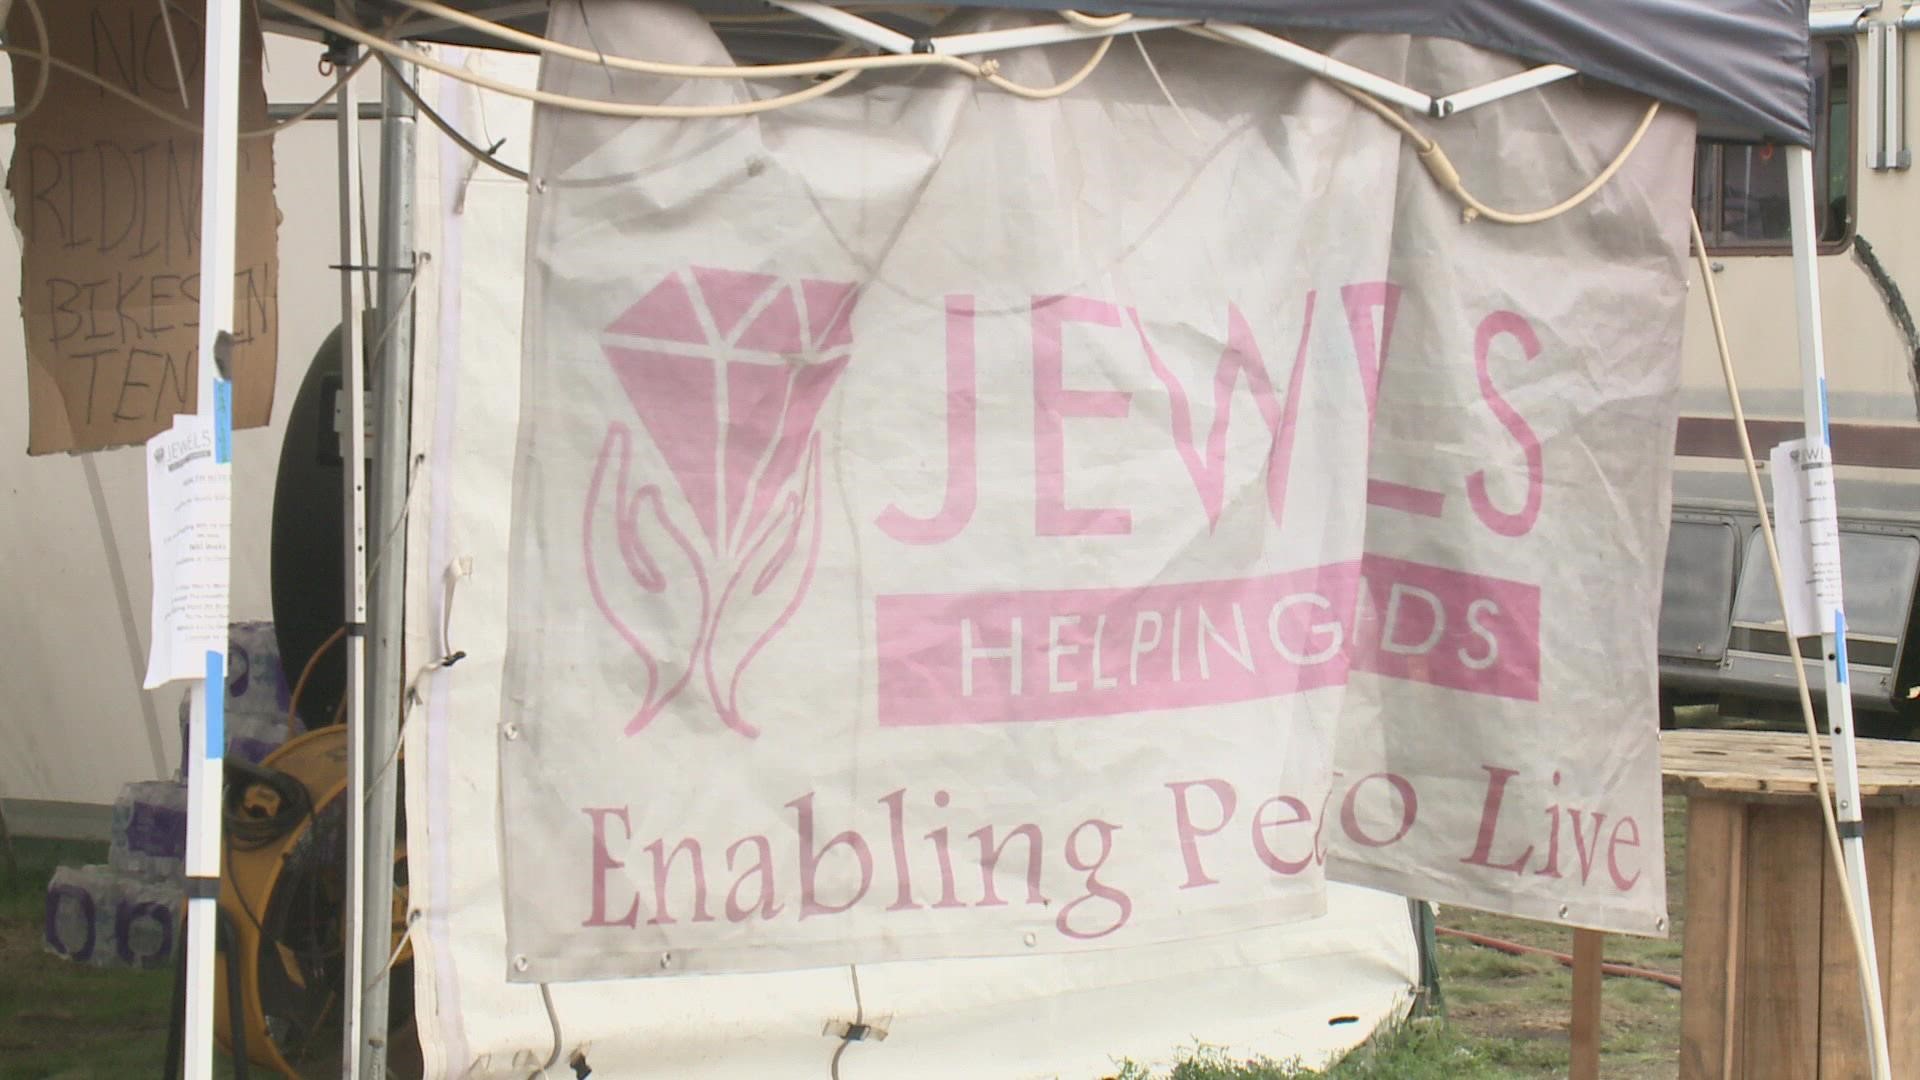 As the City looks toward clearing out the homeless encampment near I-90 and Freya, non-profits are hiring staff to ease the transition.